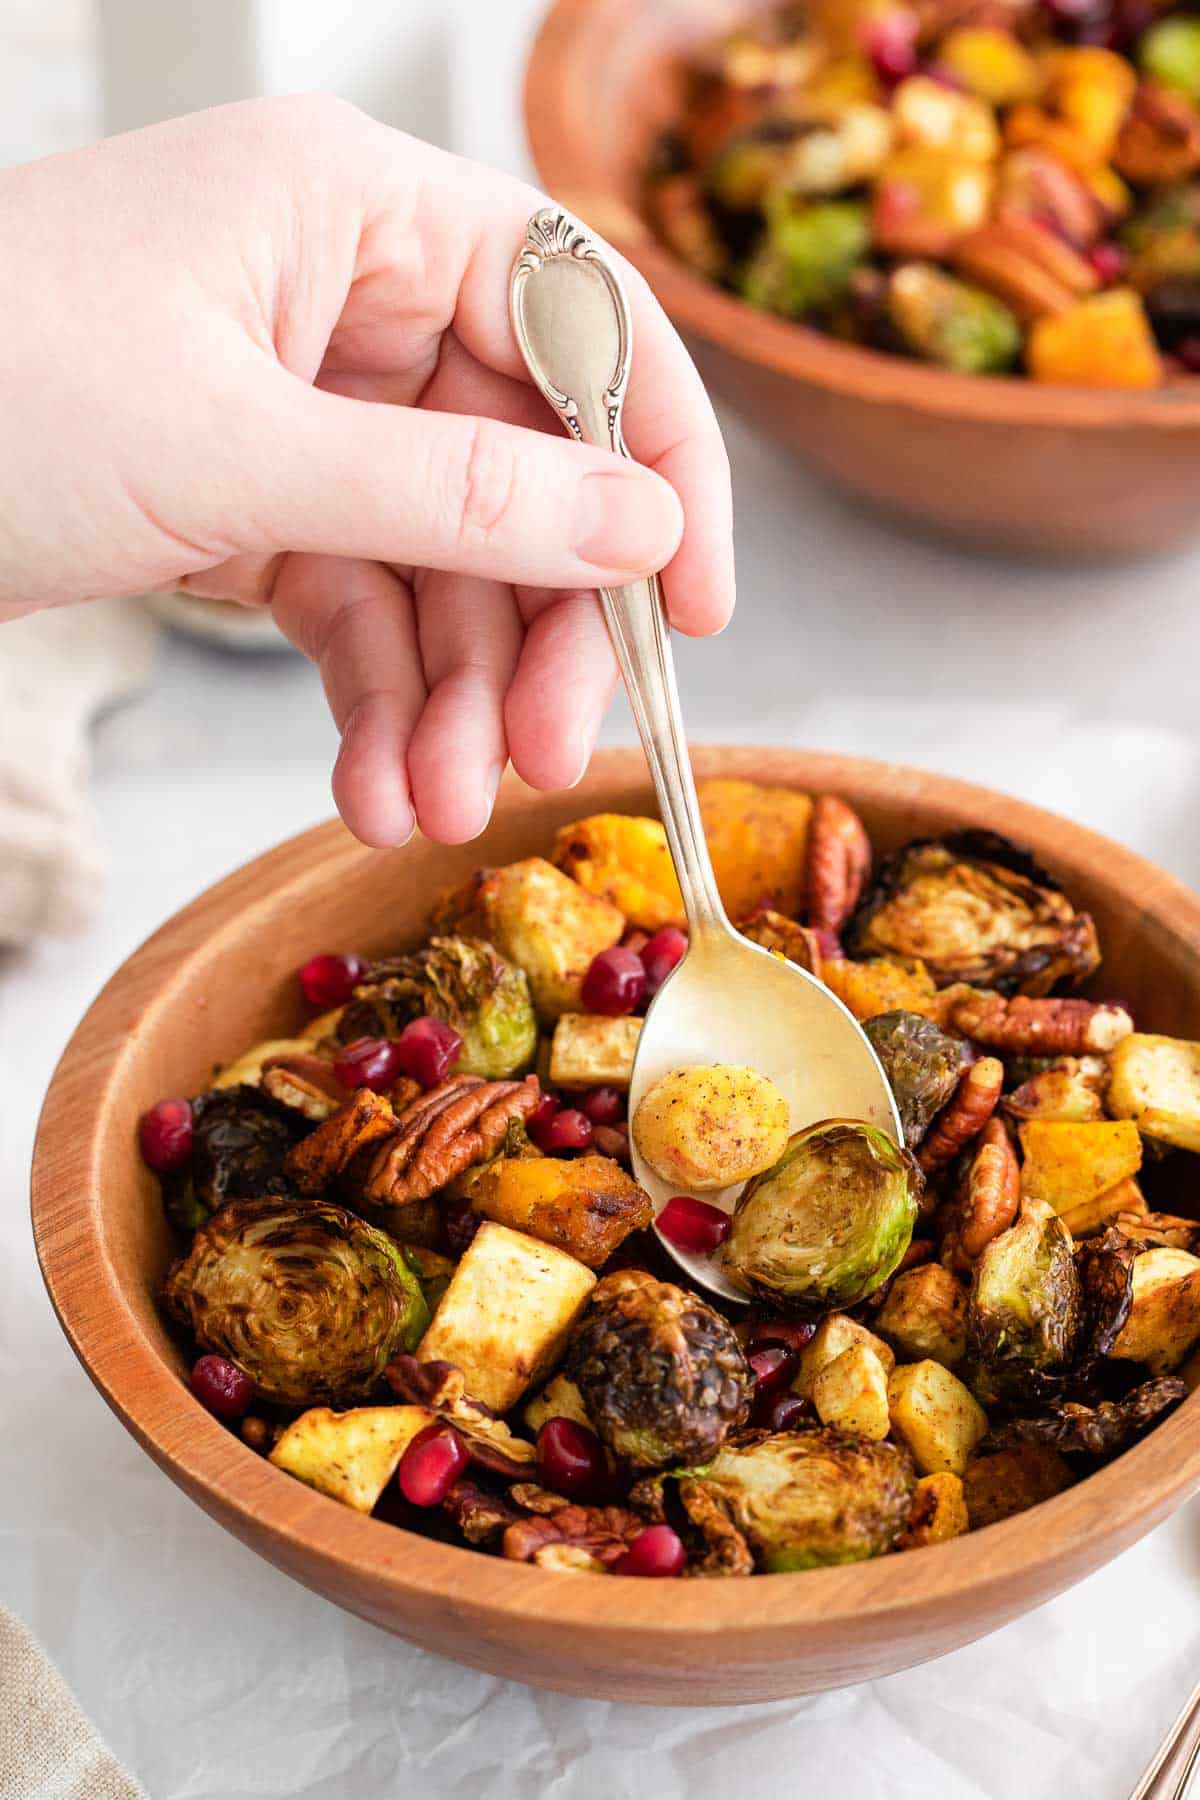 A hand scooping roasted vegetables out of a bowl with a spoon.